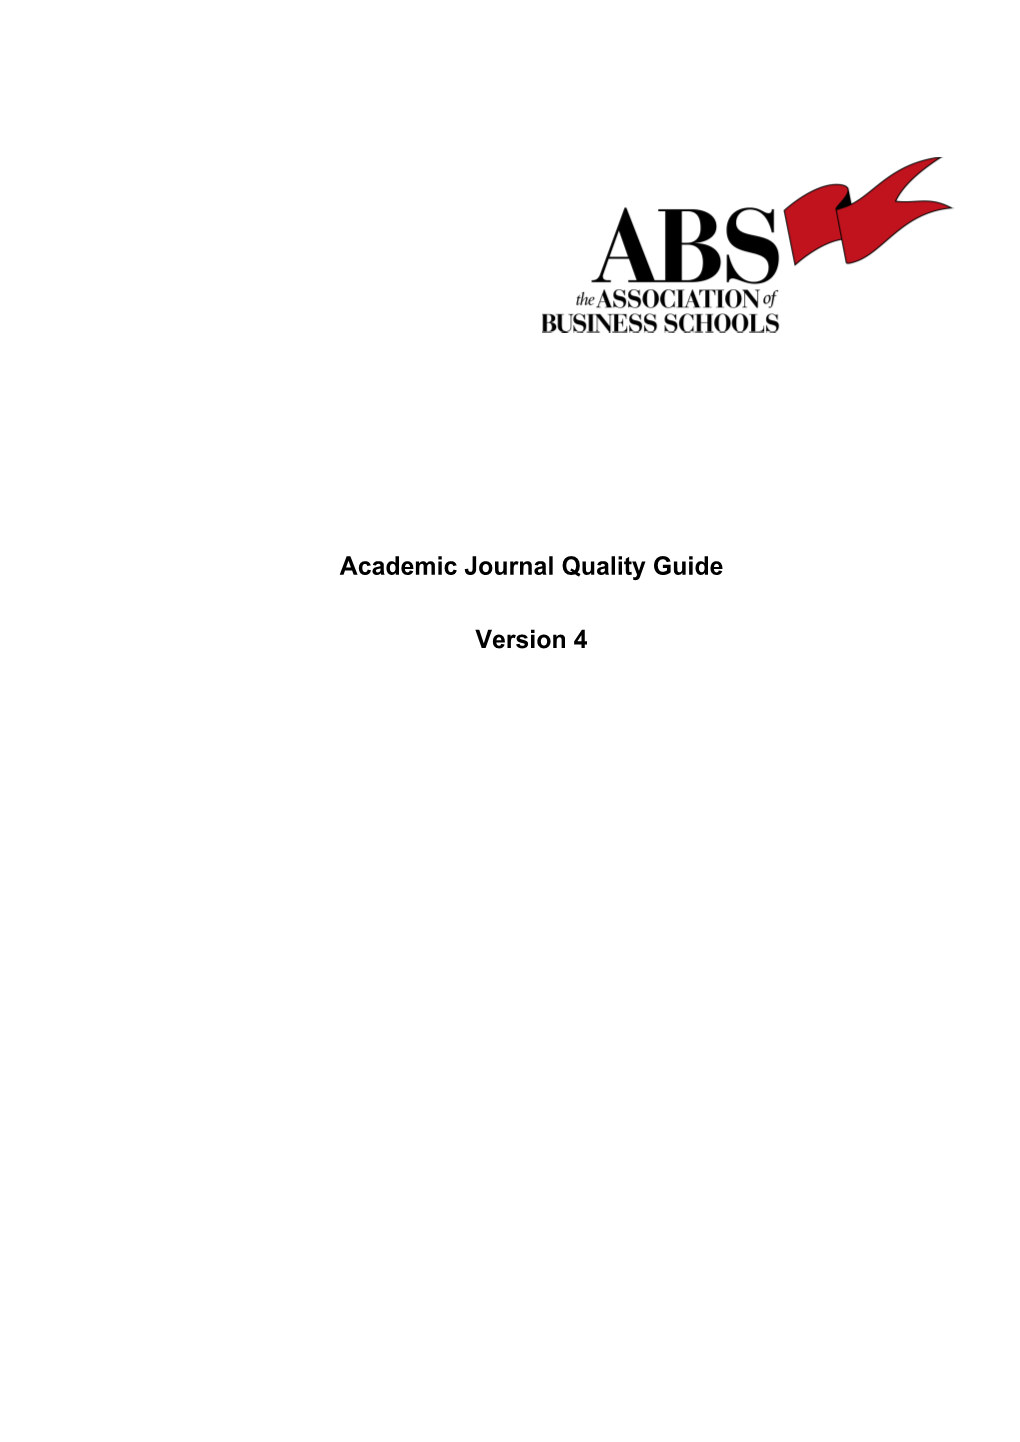 Academic Journal Quality Guide Version 4